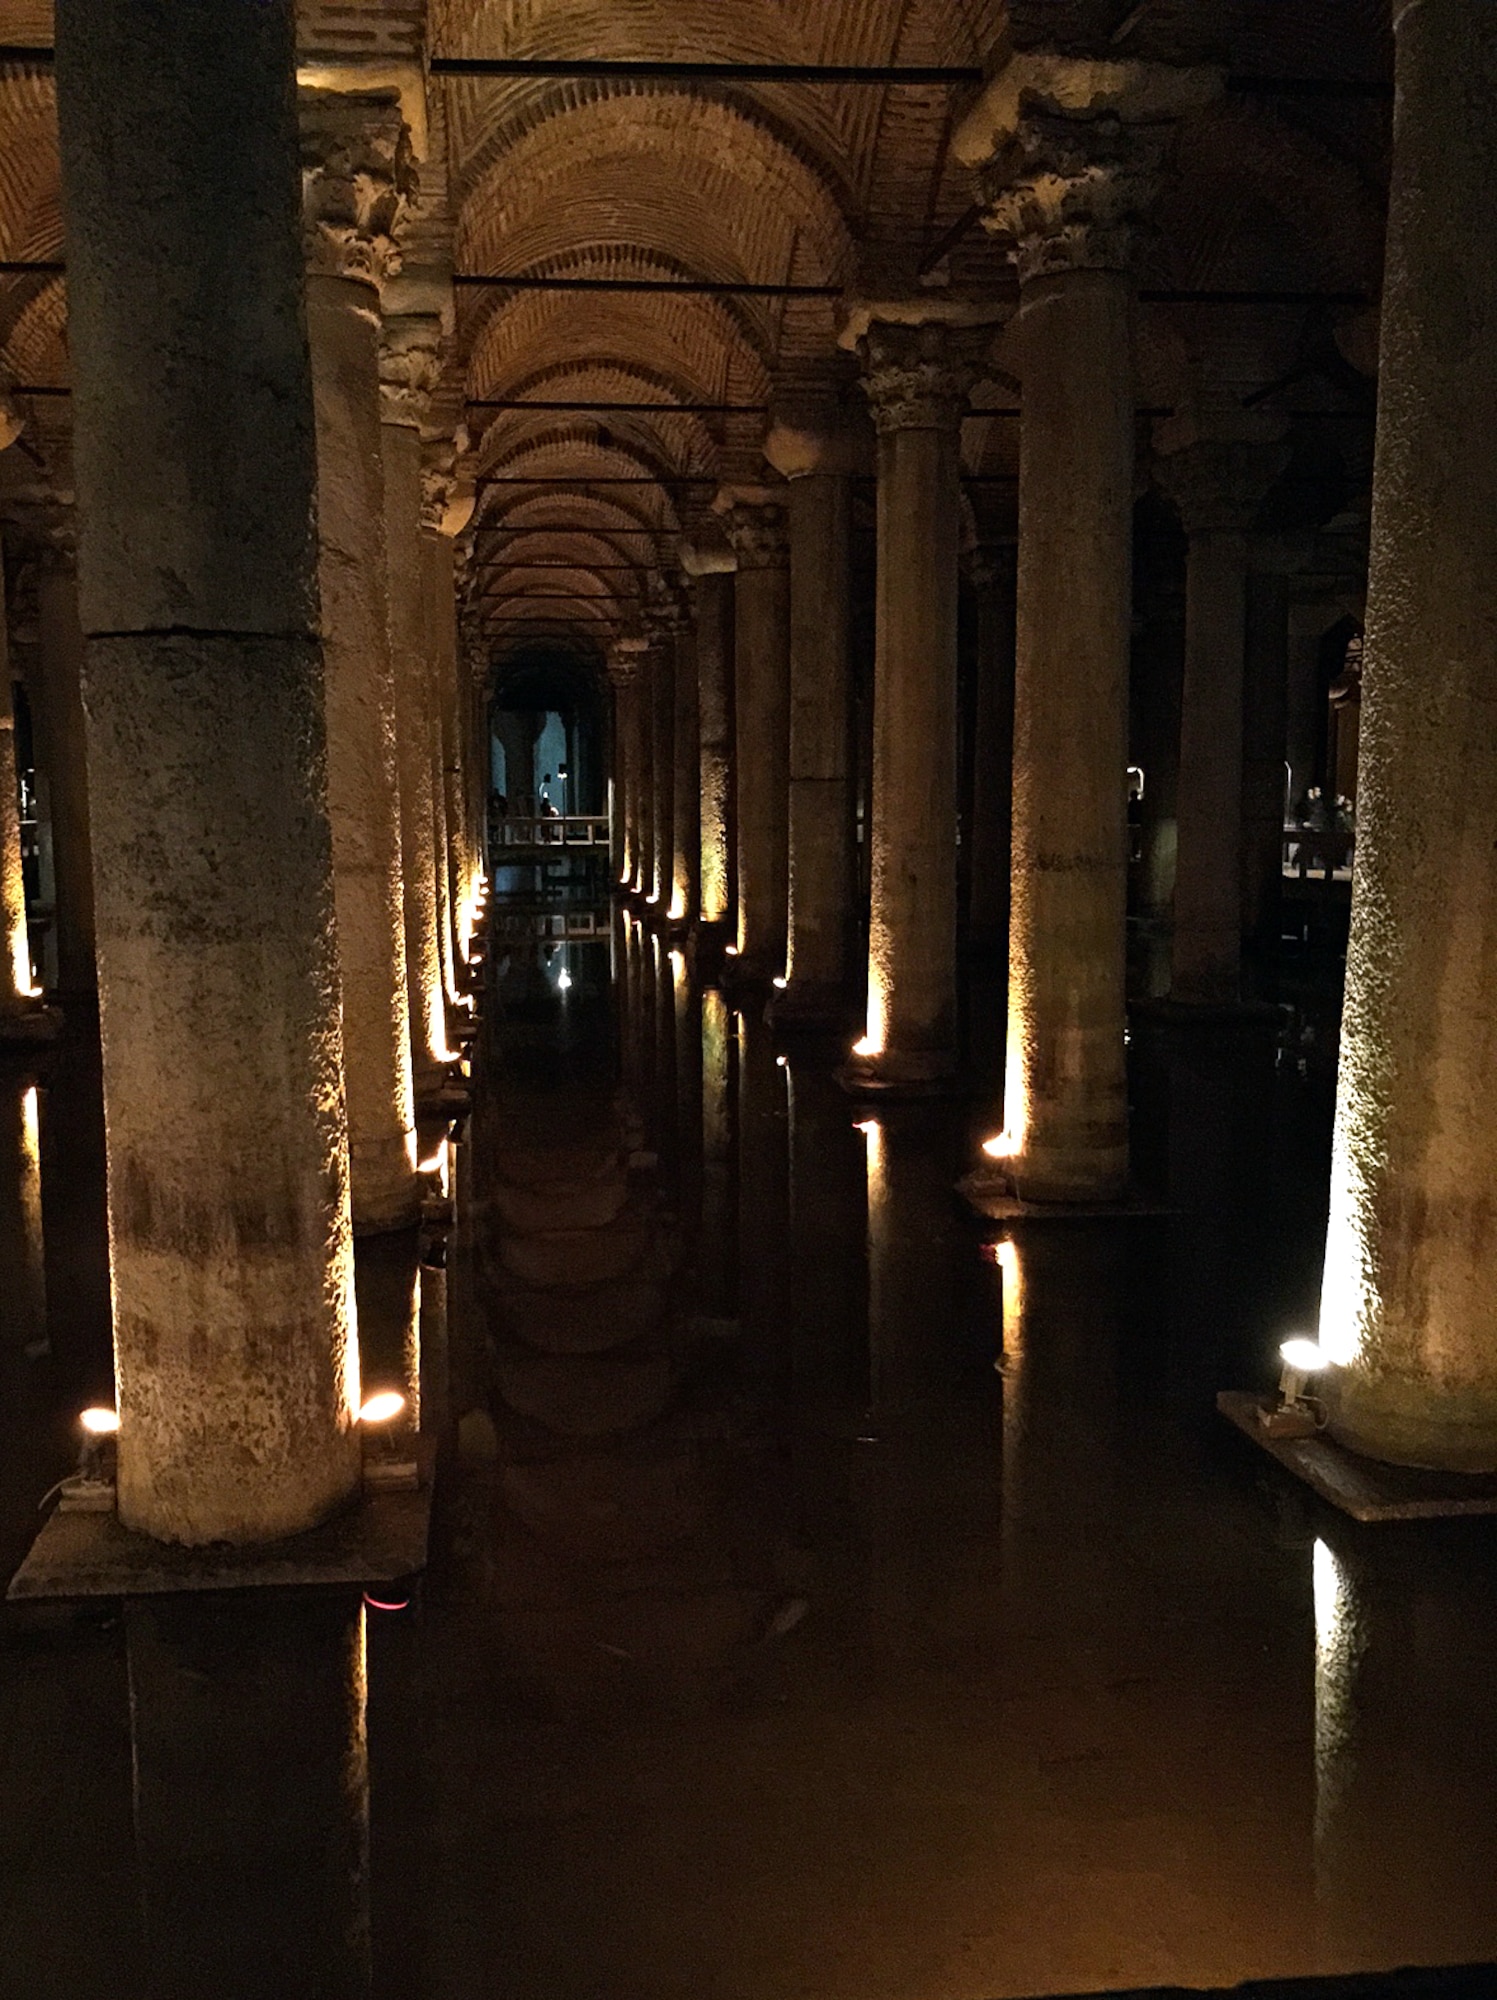 The Basilica Cistern, the largest cistern buried under the city of Istanbul, also hides two oversized emerald green Medusa heads. Of unknown origins, the heads are one of the most visited sites in Istanbul. (U.S. Air Force photo by Senior Airman Michael Battles/Released)